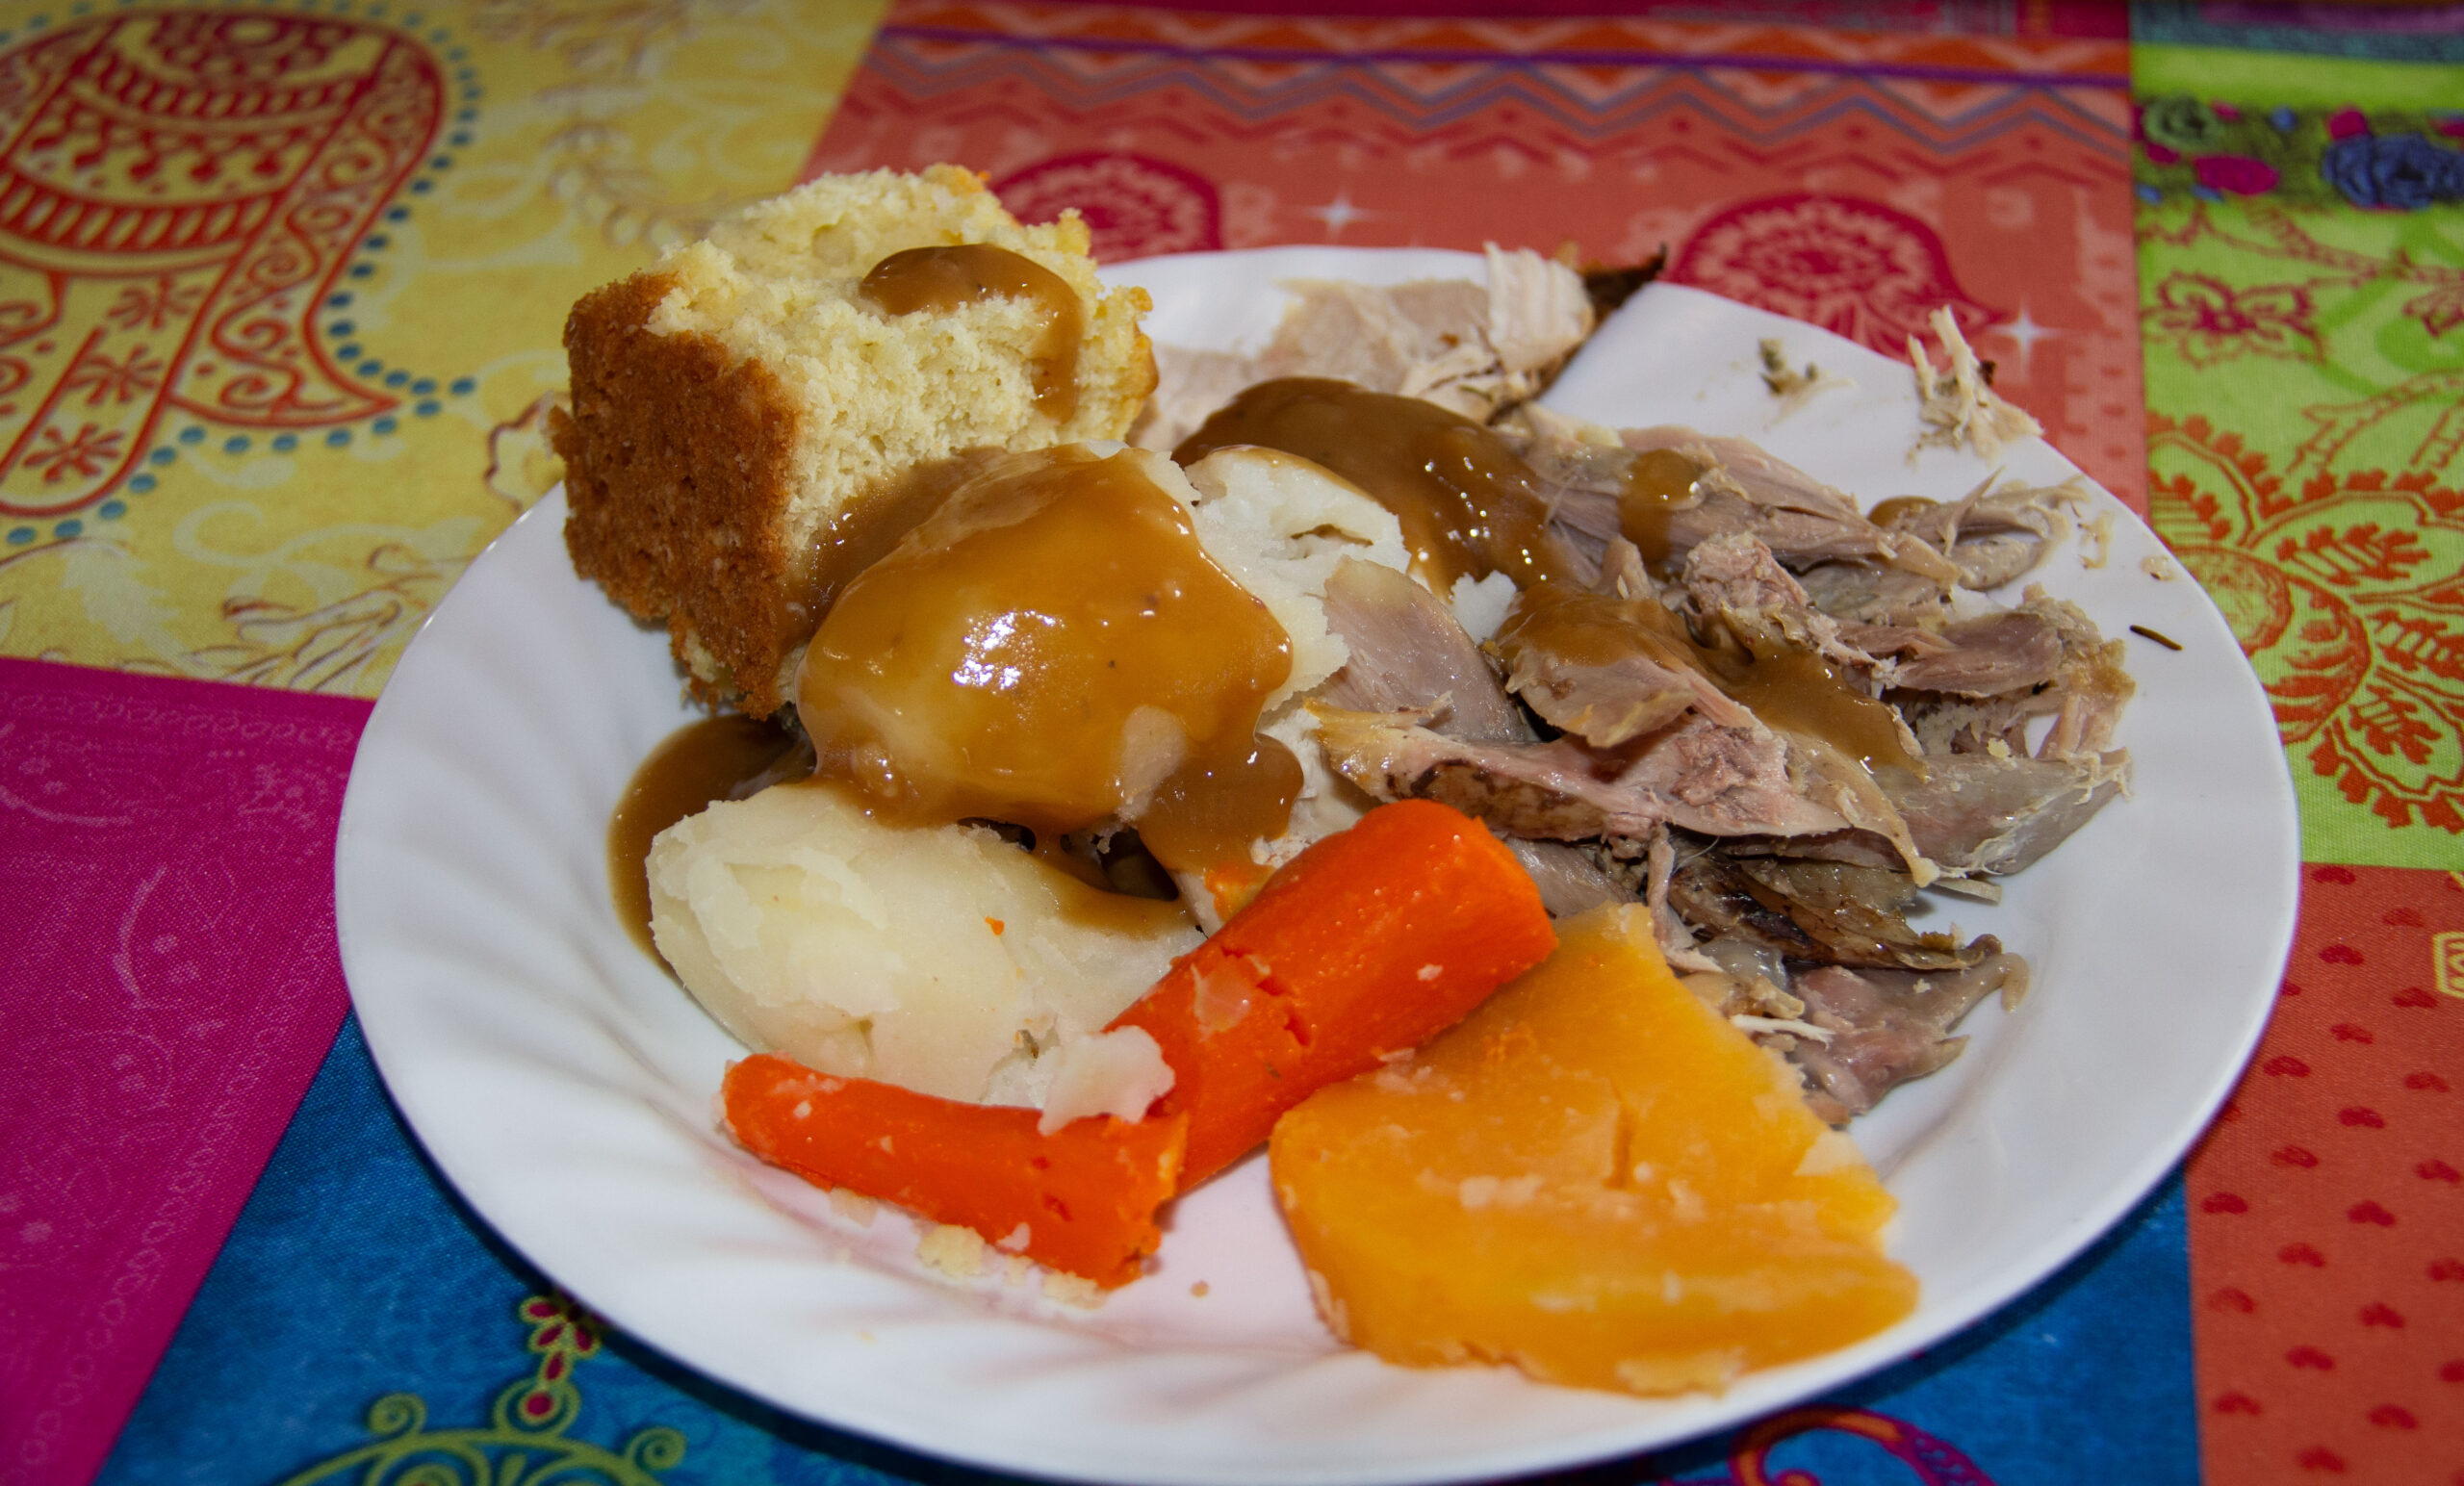 A plate filled with food for Jiggs' Dinner. Veggies, stuffing, turkey, and bread pupping, coated in gravy.